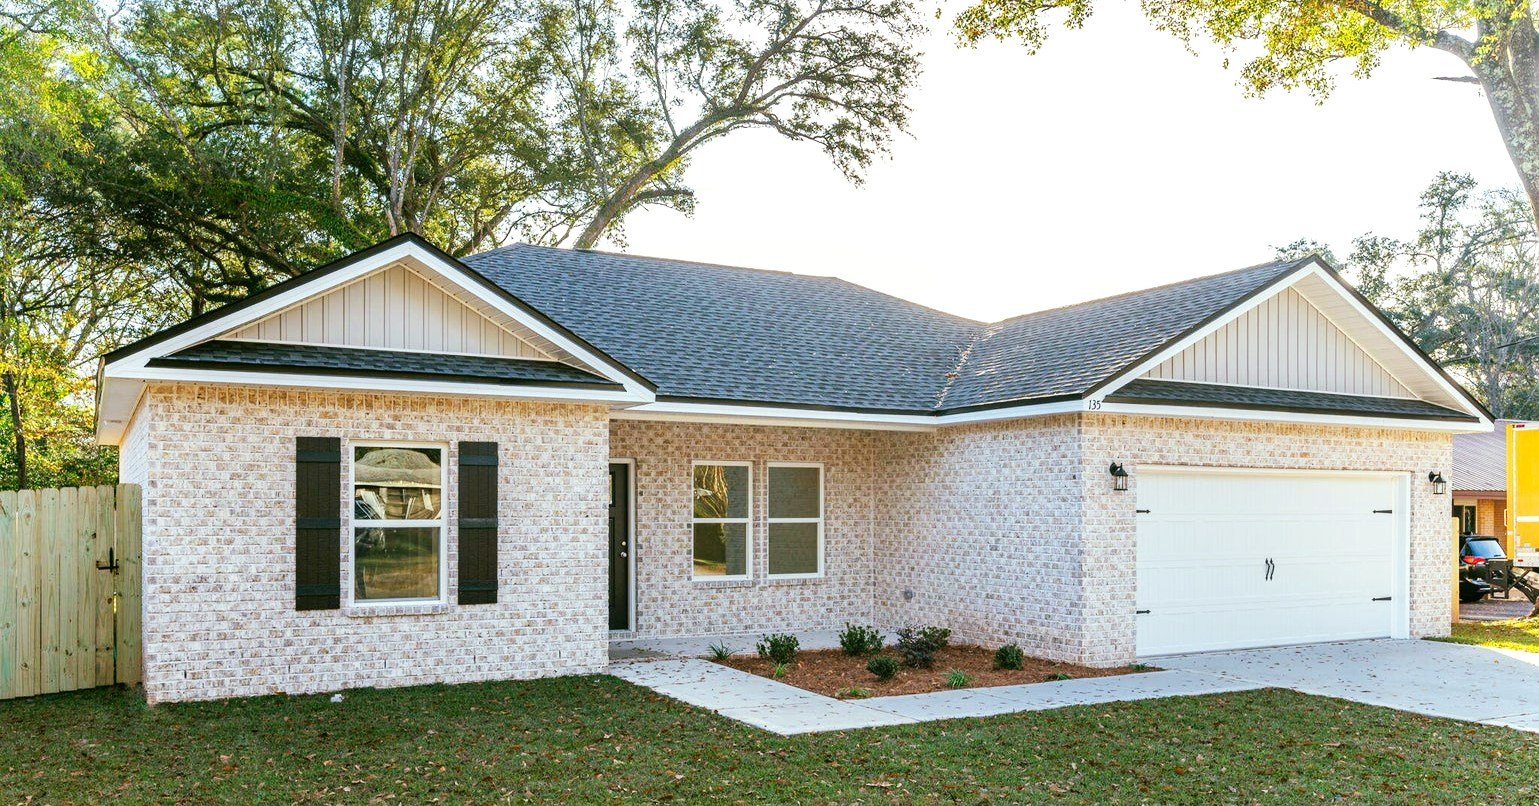 🏡 **Just Listed!** 🎉

Exciting news! A brand new home has hit the market in North Crestview!

📍 Address: 6478 Burleson Boulevard, Crestview, FL 32539 
💰 Price: $275,000 
🛏️ Bedrooms: 3 
🛁 Baths: 2 

This cozy single-family home offers modern co